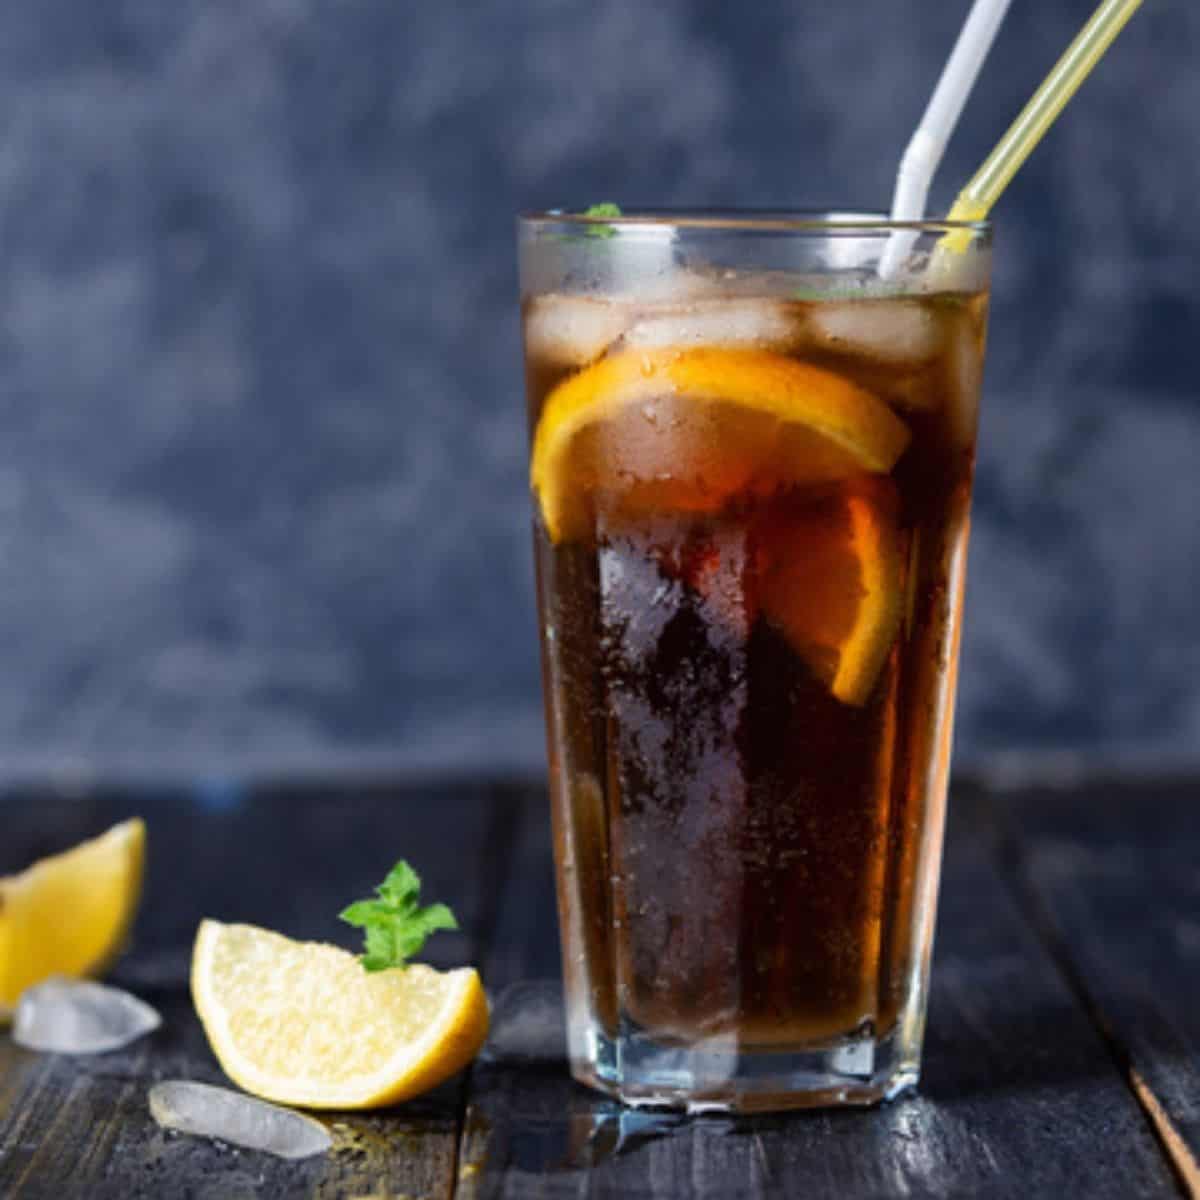 https://www.thermomixdivarecipes.com/wp-content/uploads/2021/09/Thermomix-Long-Island-Iced-Tea_1200px_sqr.jpg